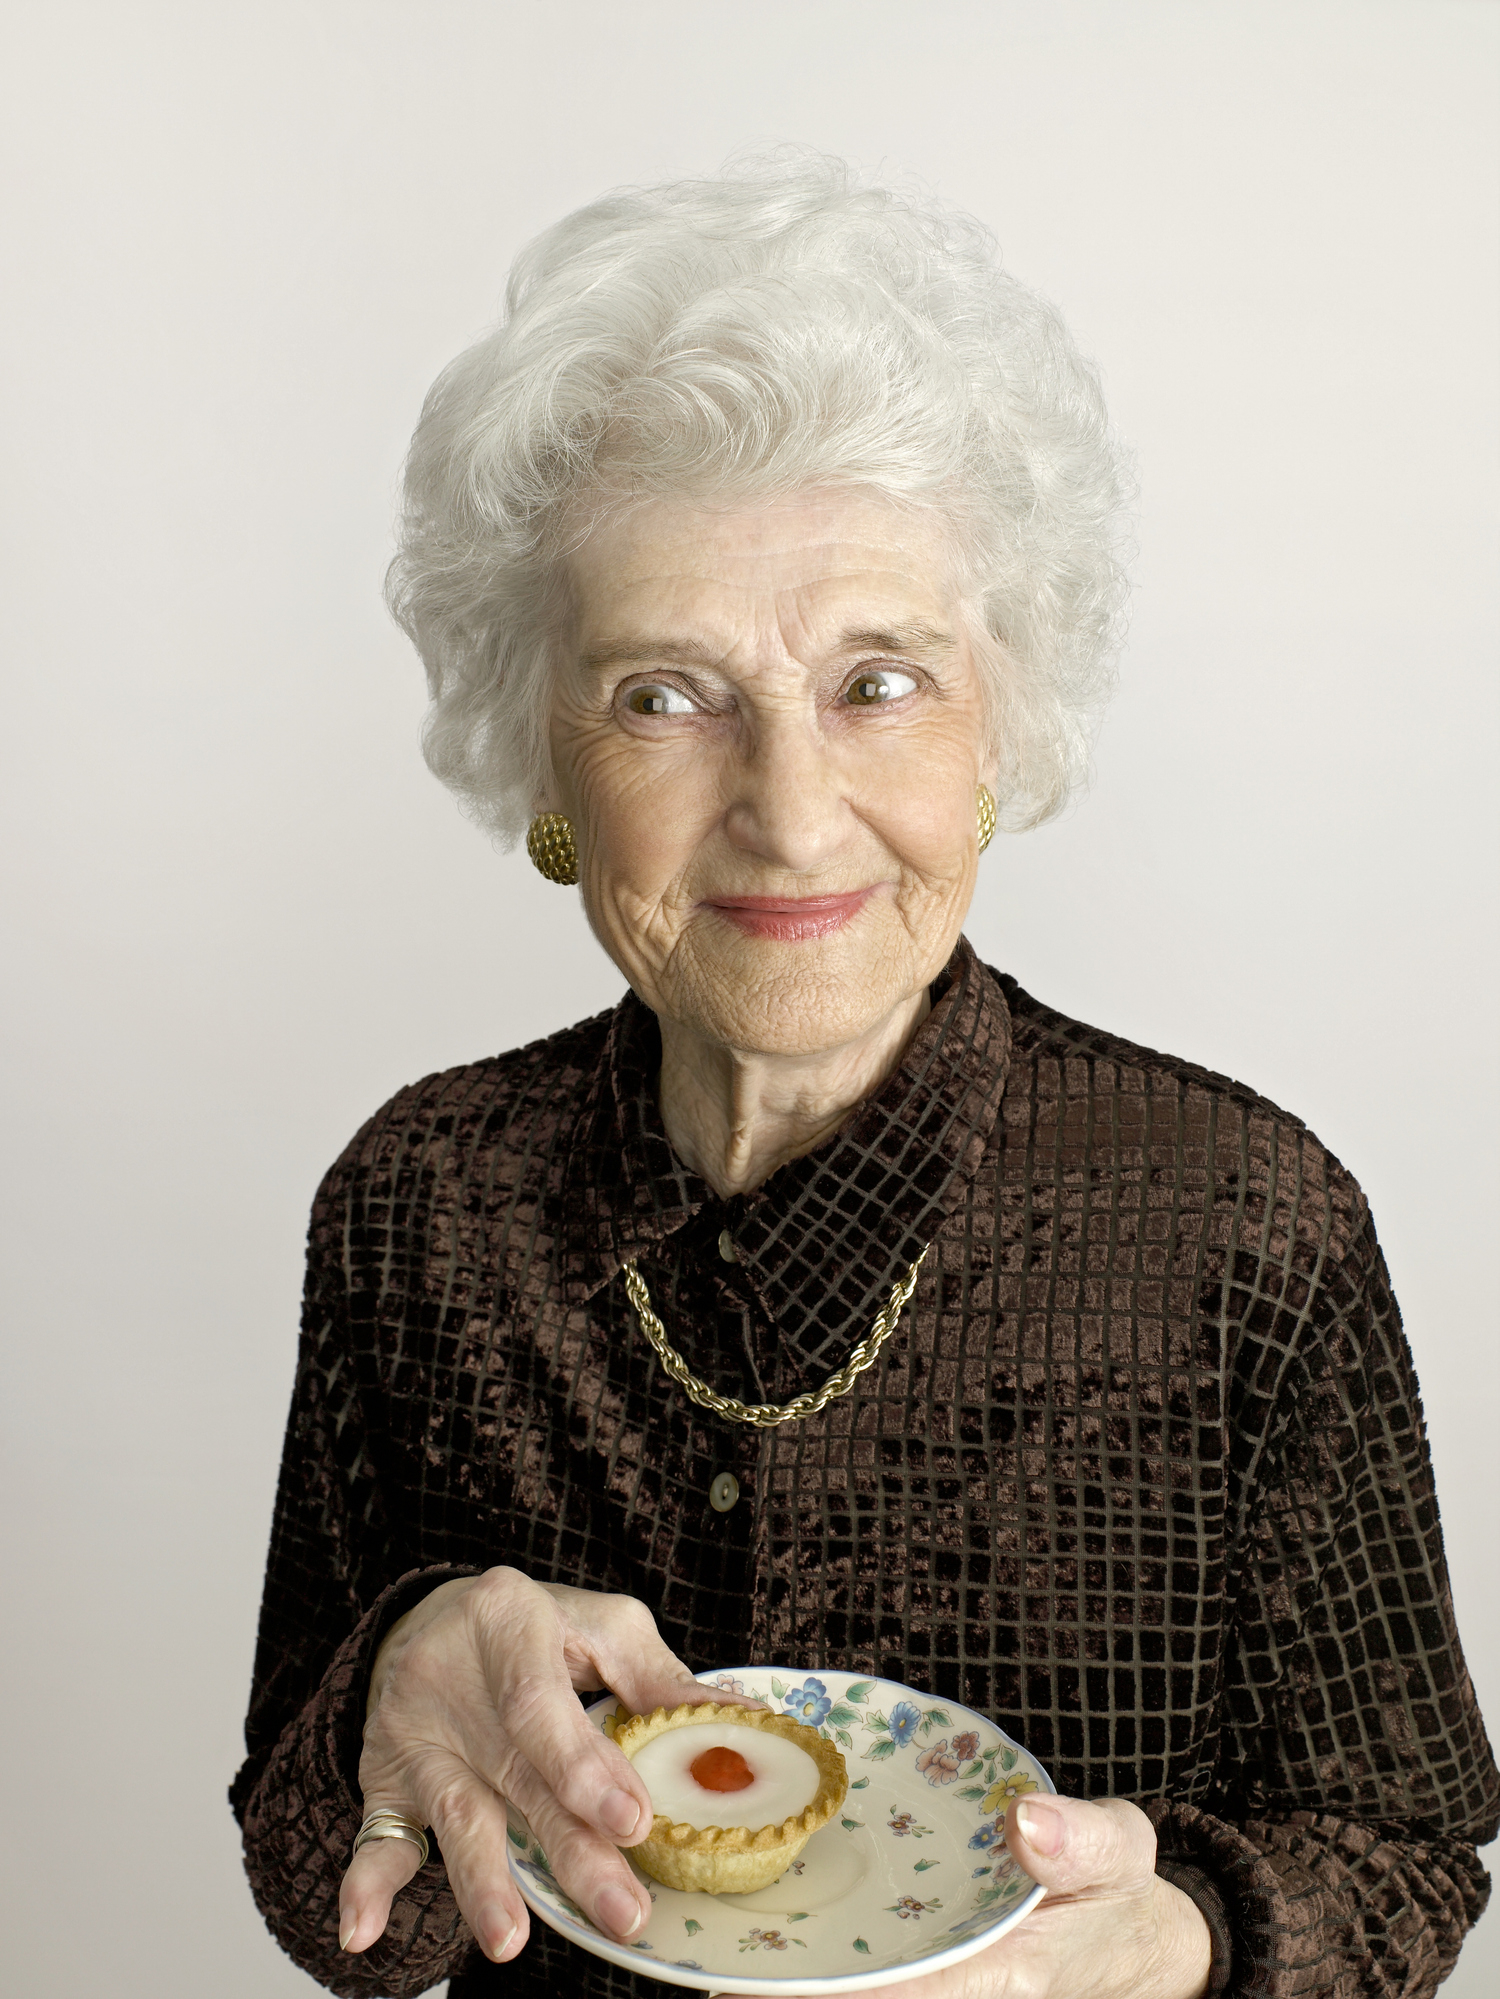 Elderly woman smiling, holding a plate with a pastry, dressed in a brown lace blouse and wearing earrings and a necklace